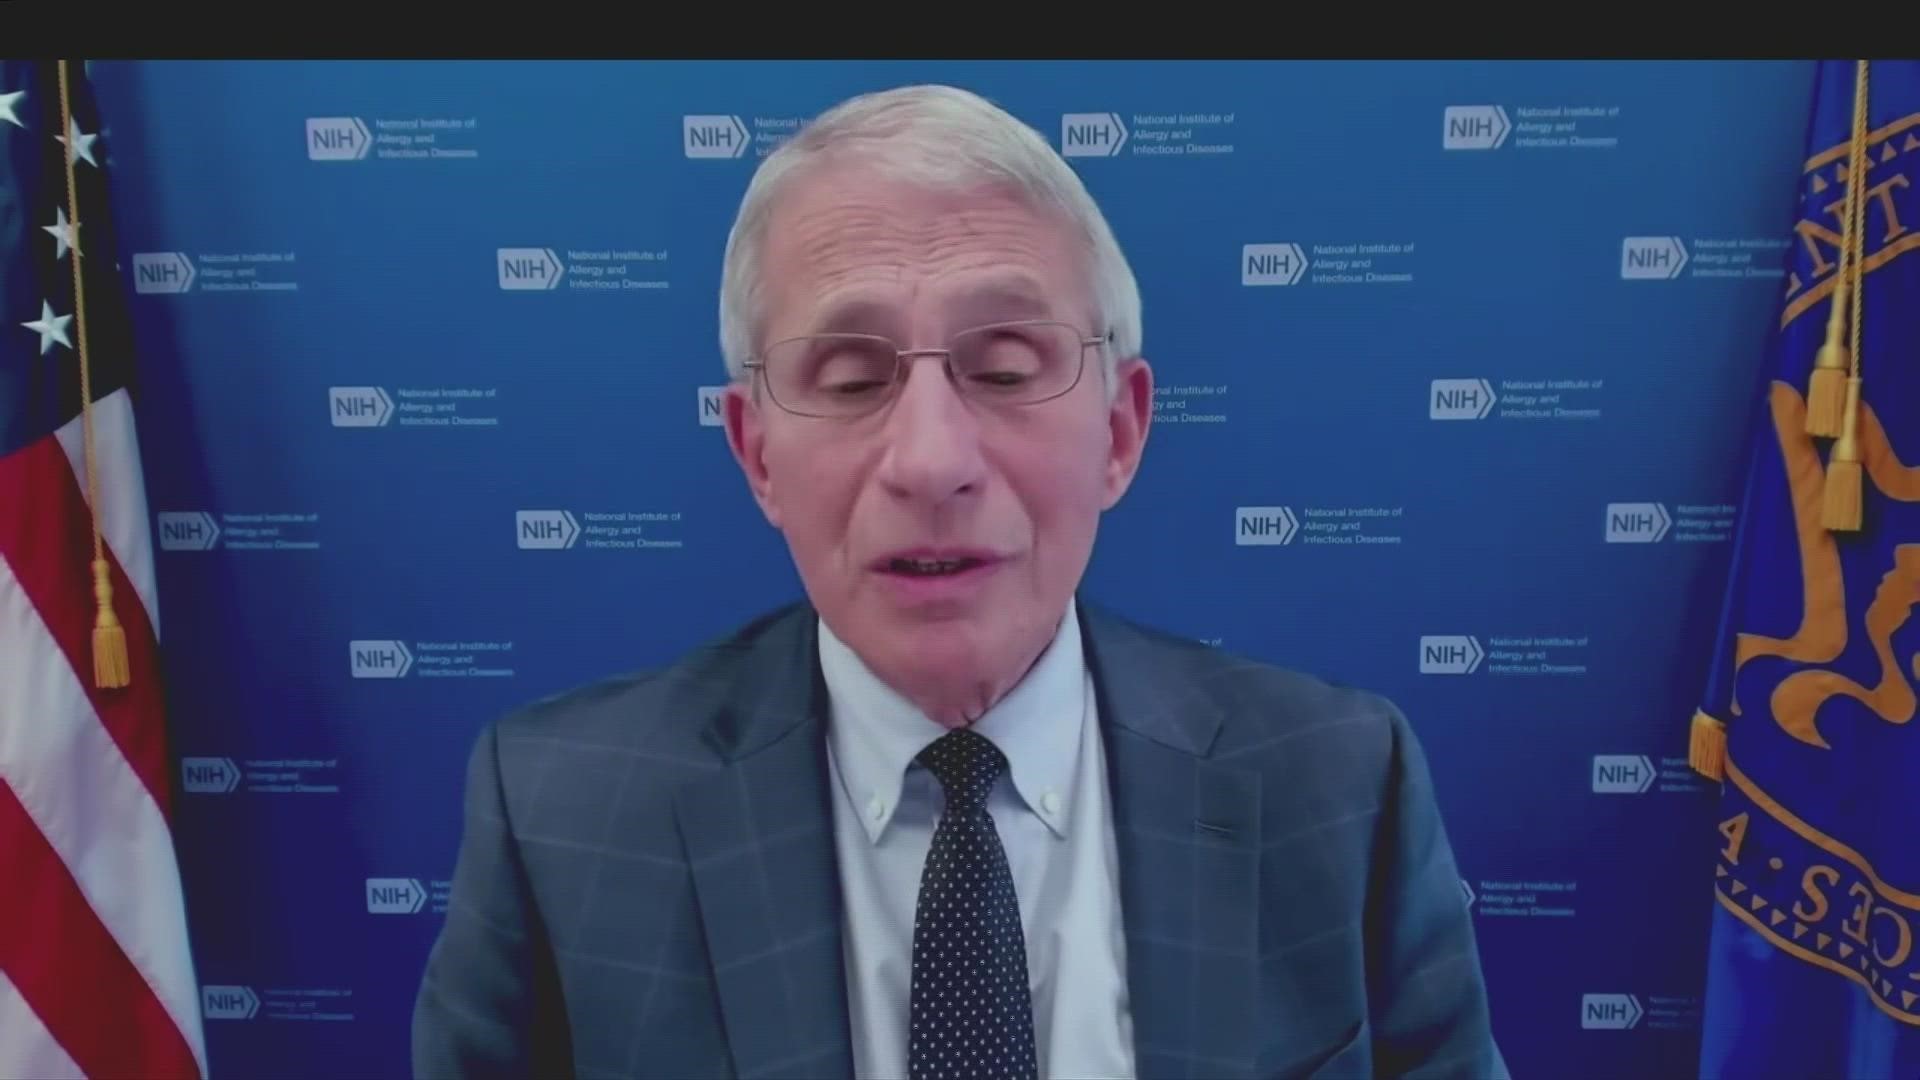 During Tuesday's COVID-19 briefing, Dr. Anthony Fauci detailed concerns about the omicron variant and how it differs from the delta variant.